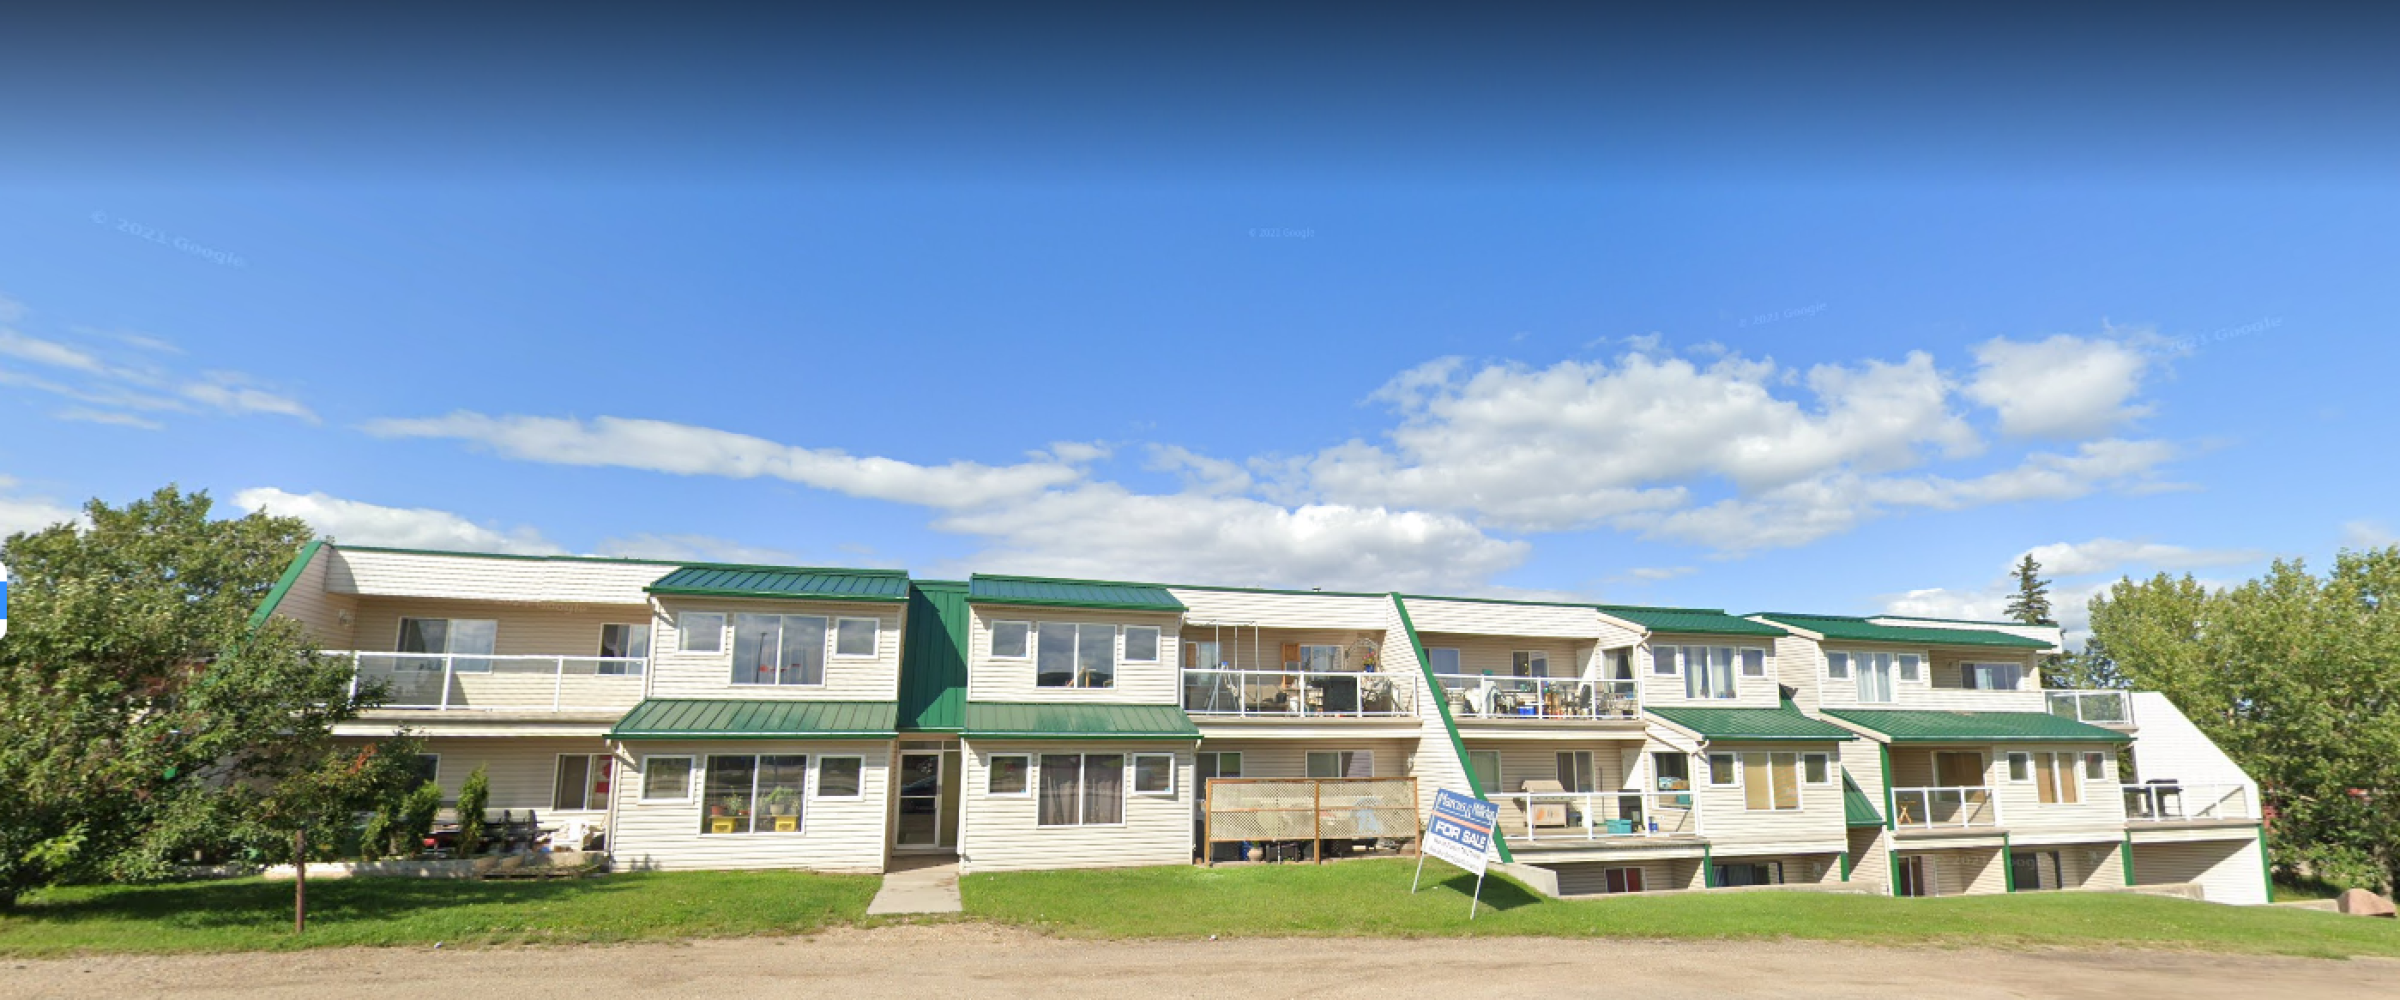 Equity Rentals Apartments: Alden Arms 10420 100 Ave